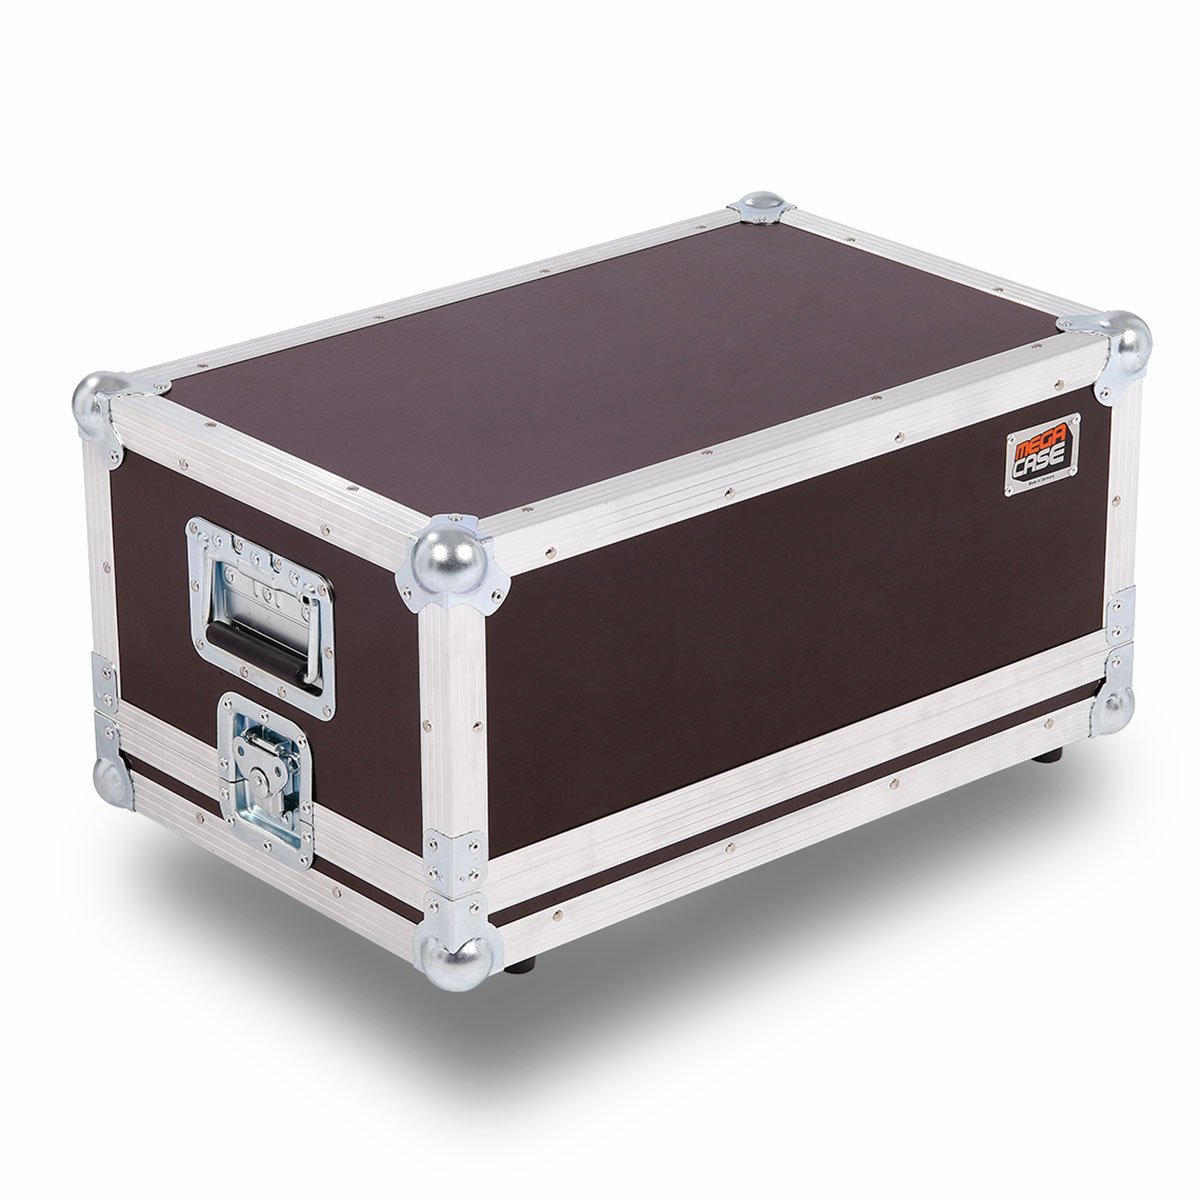 Wide variety of flight case specifications